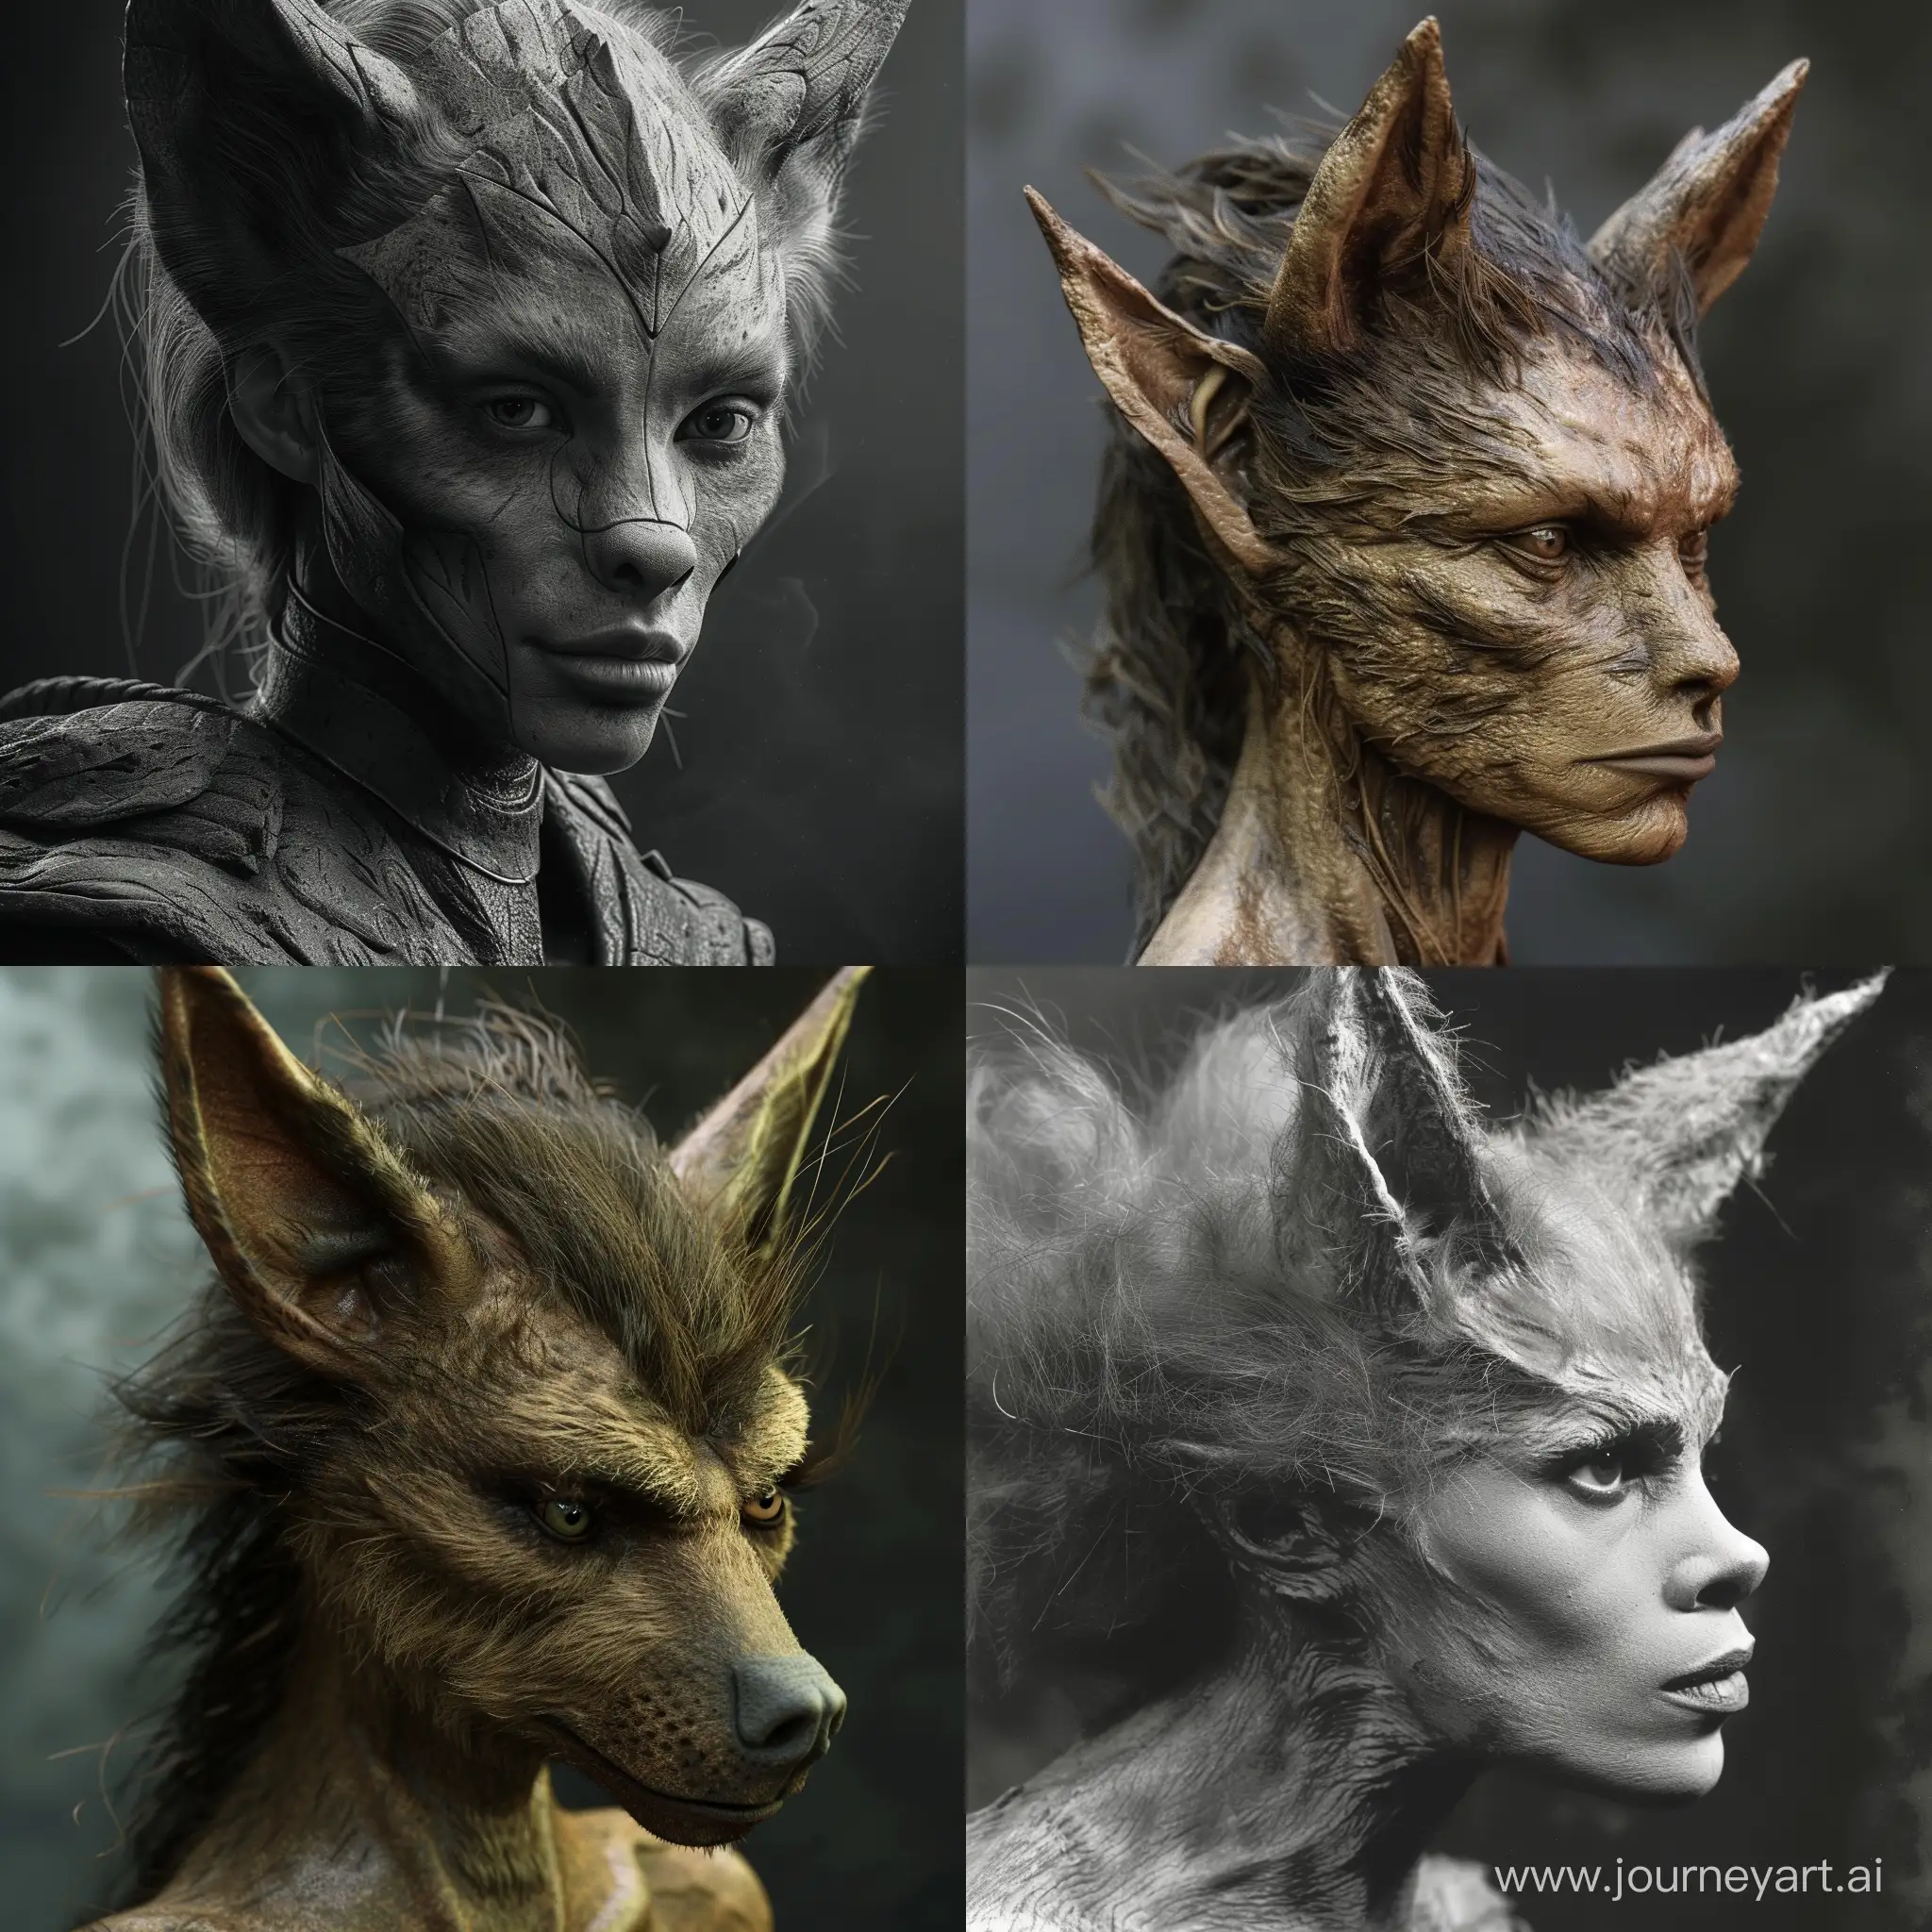 Werewolf female, human like, ears are pointed up and extrude from top of head